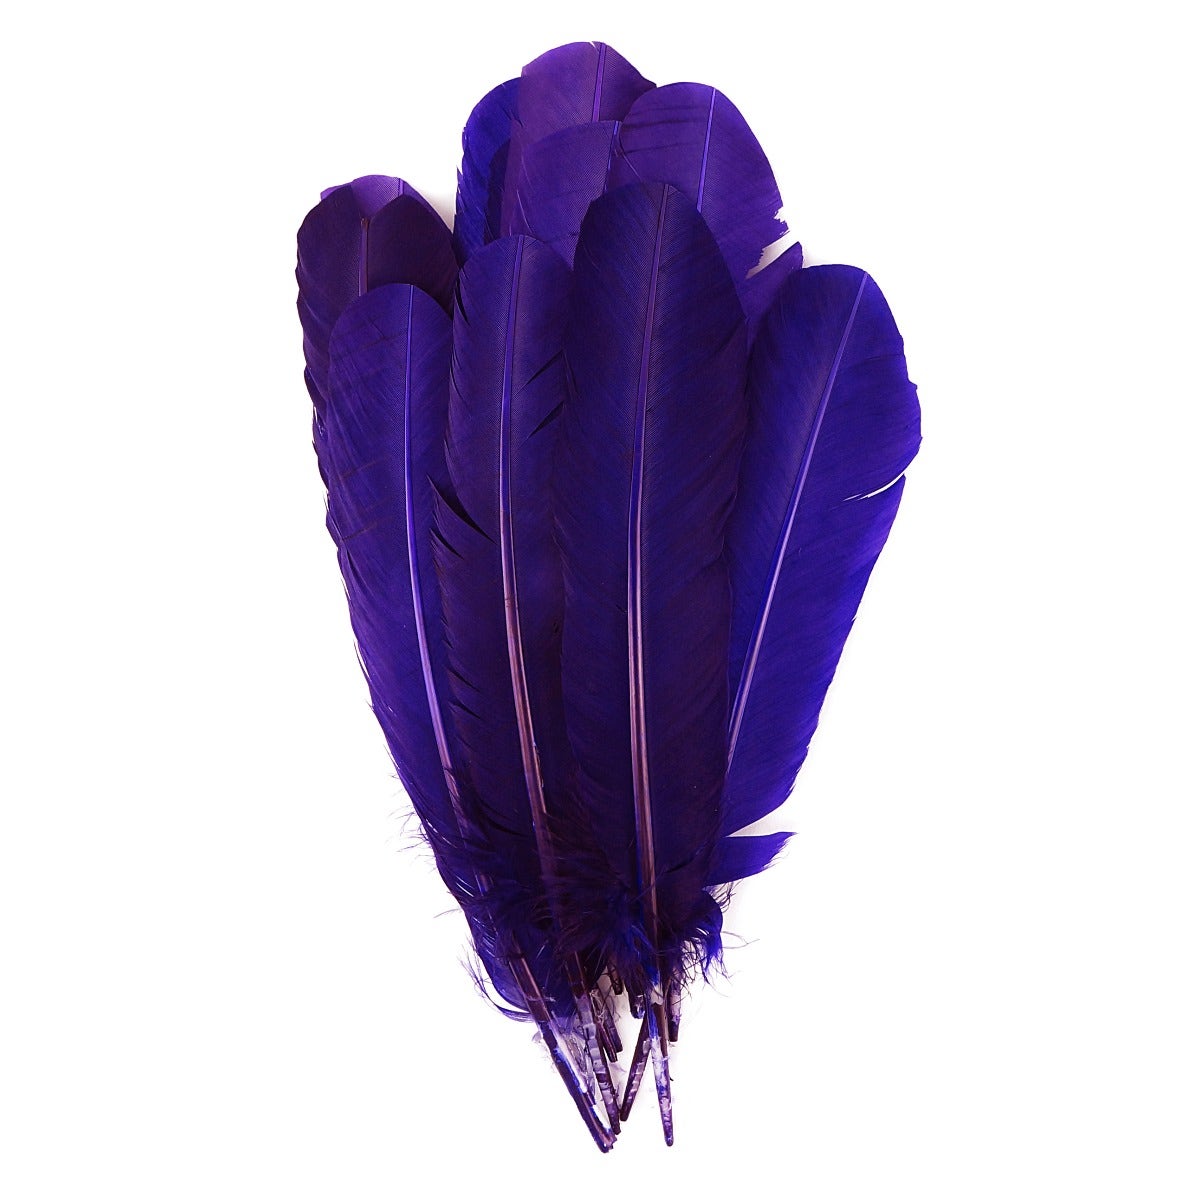 4 PC PKG Turkey Quills Dyed Feathers 10-12" - Regal